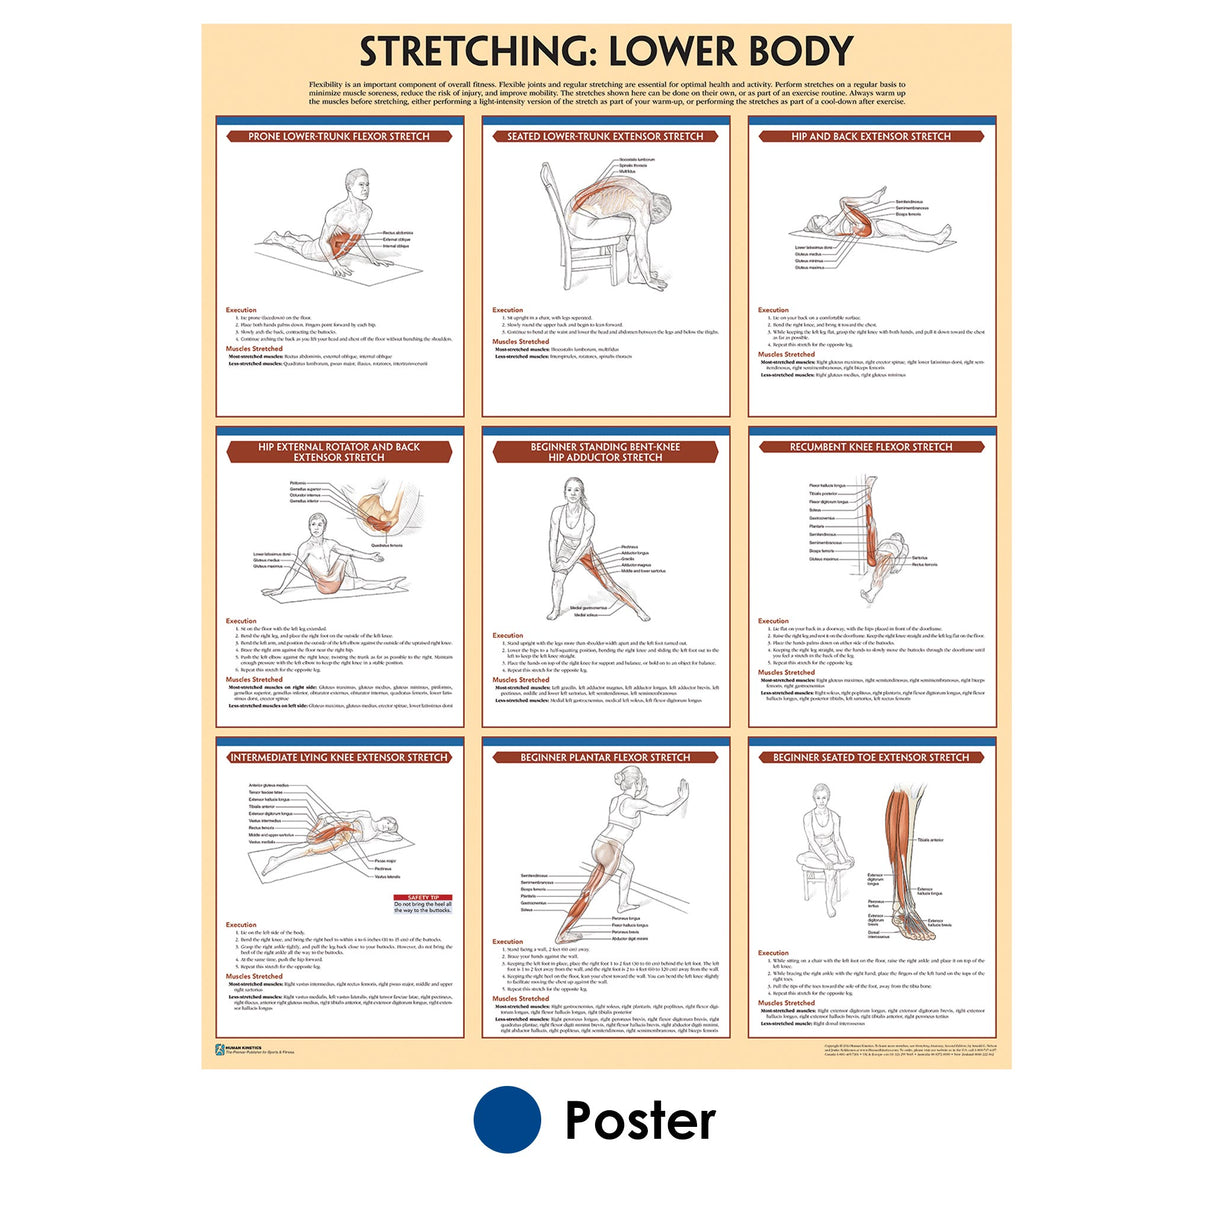 Stretching Poster: Lower Body